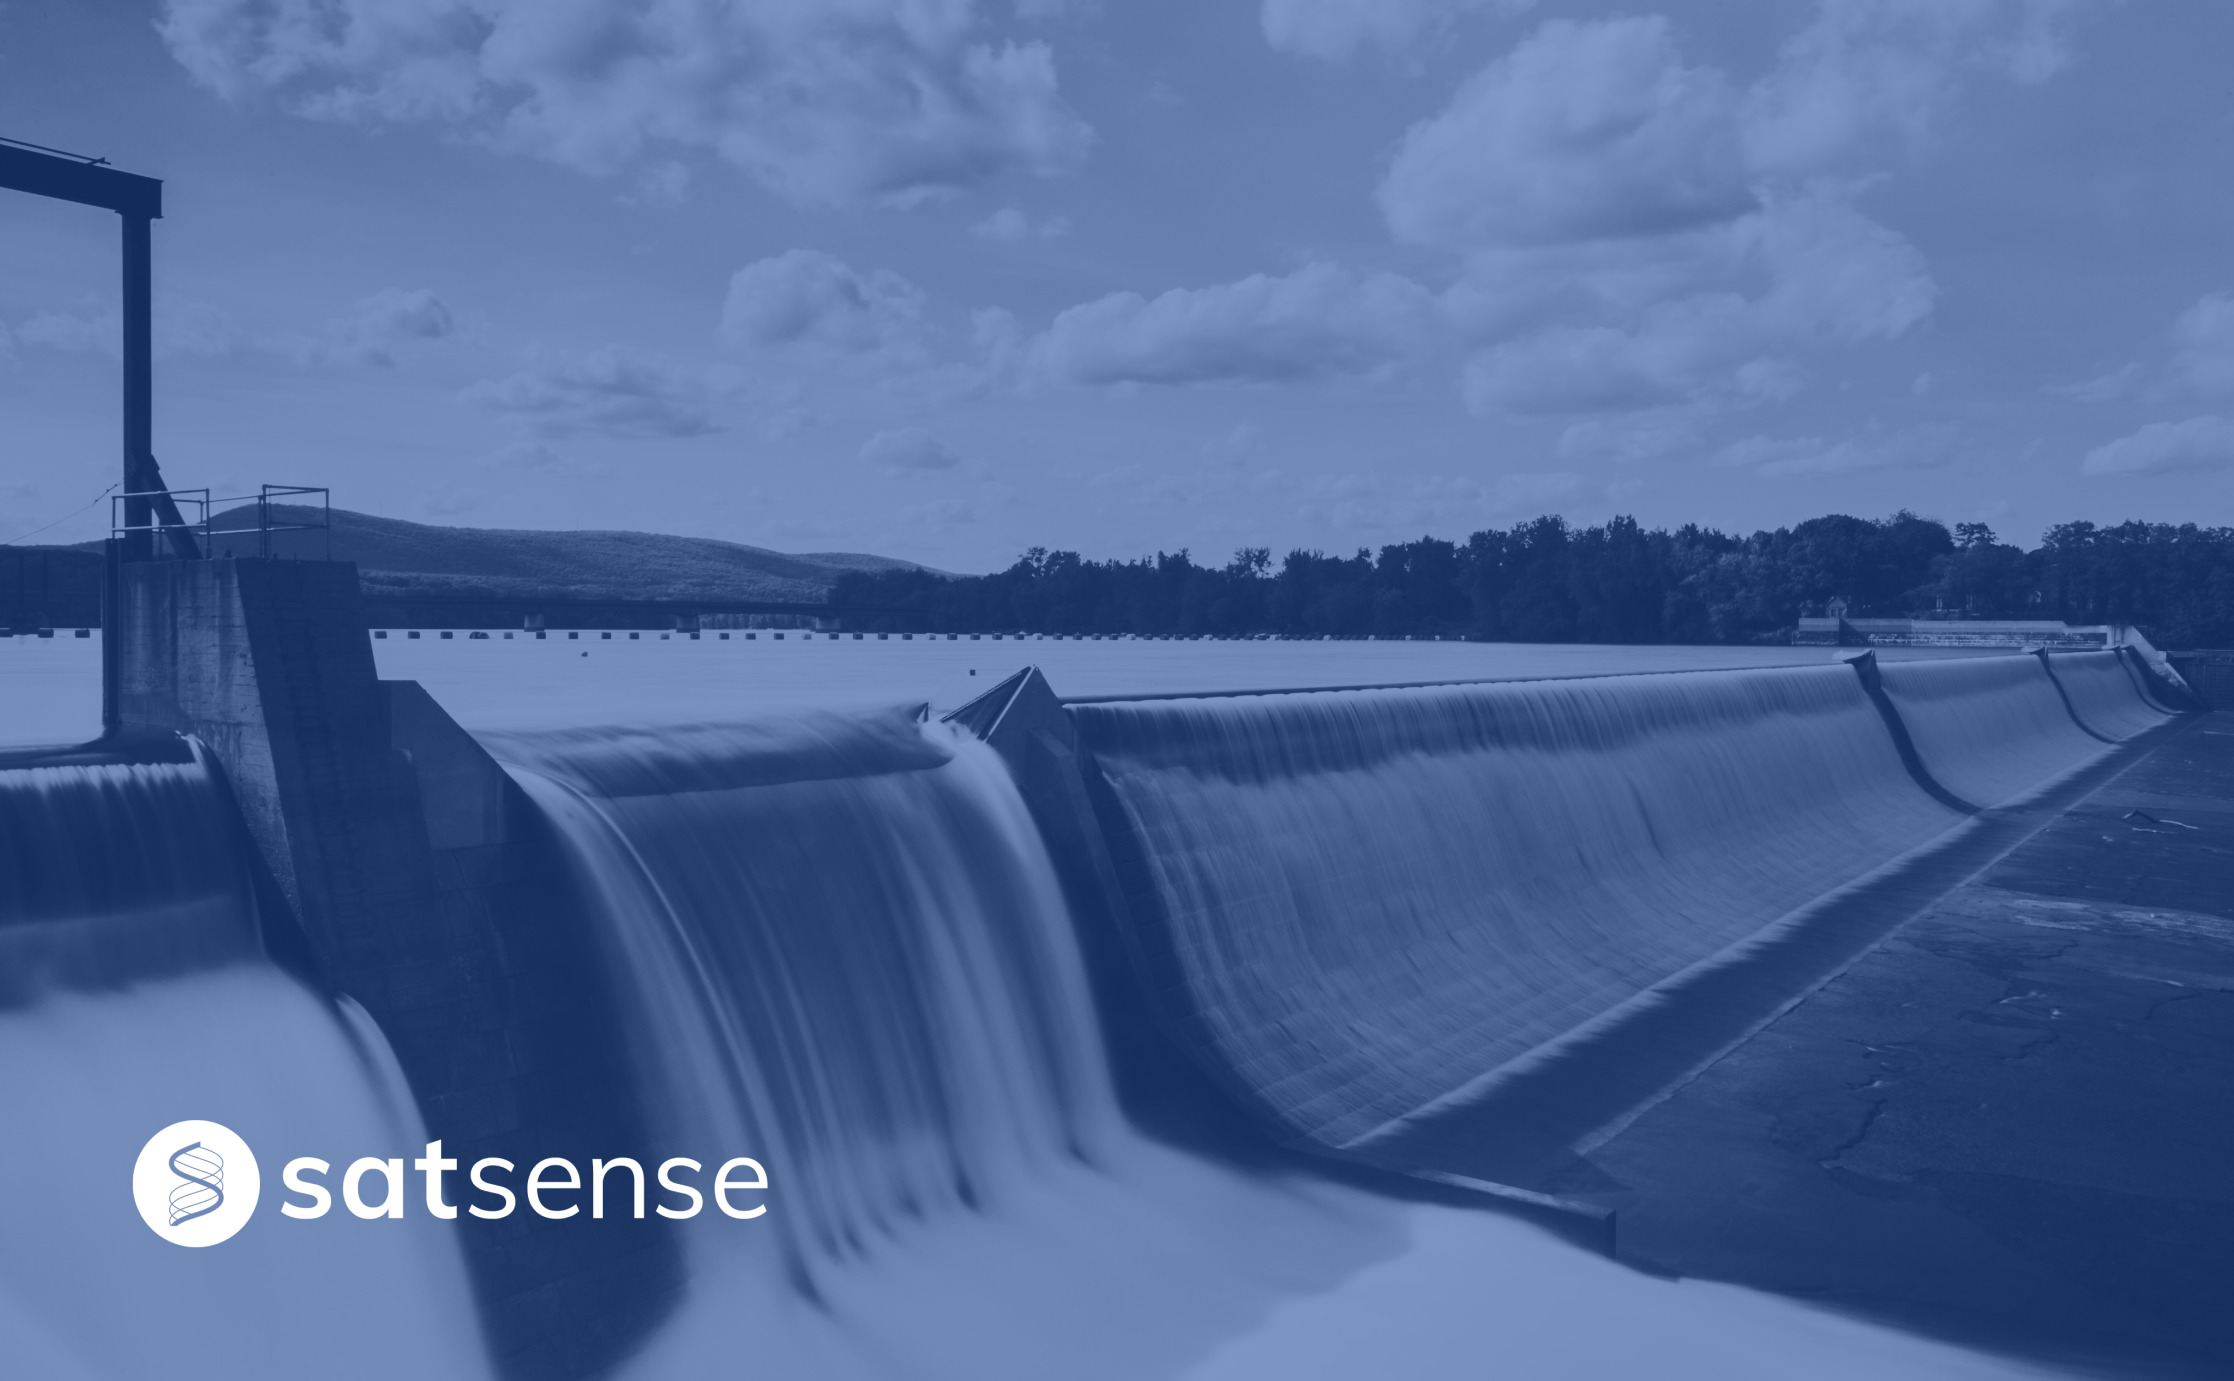 Water flowing from a Dam with SatSense logo on the bottom left corner